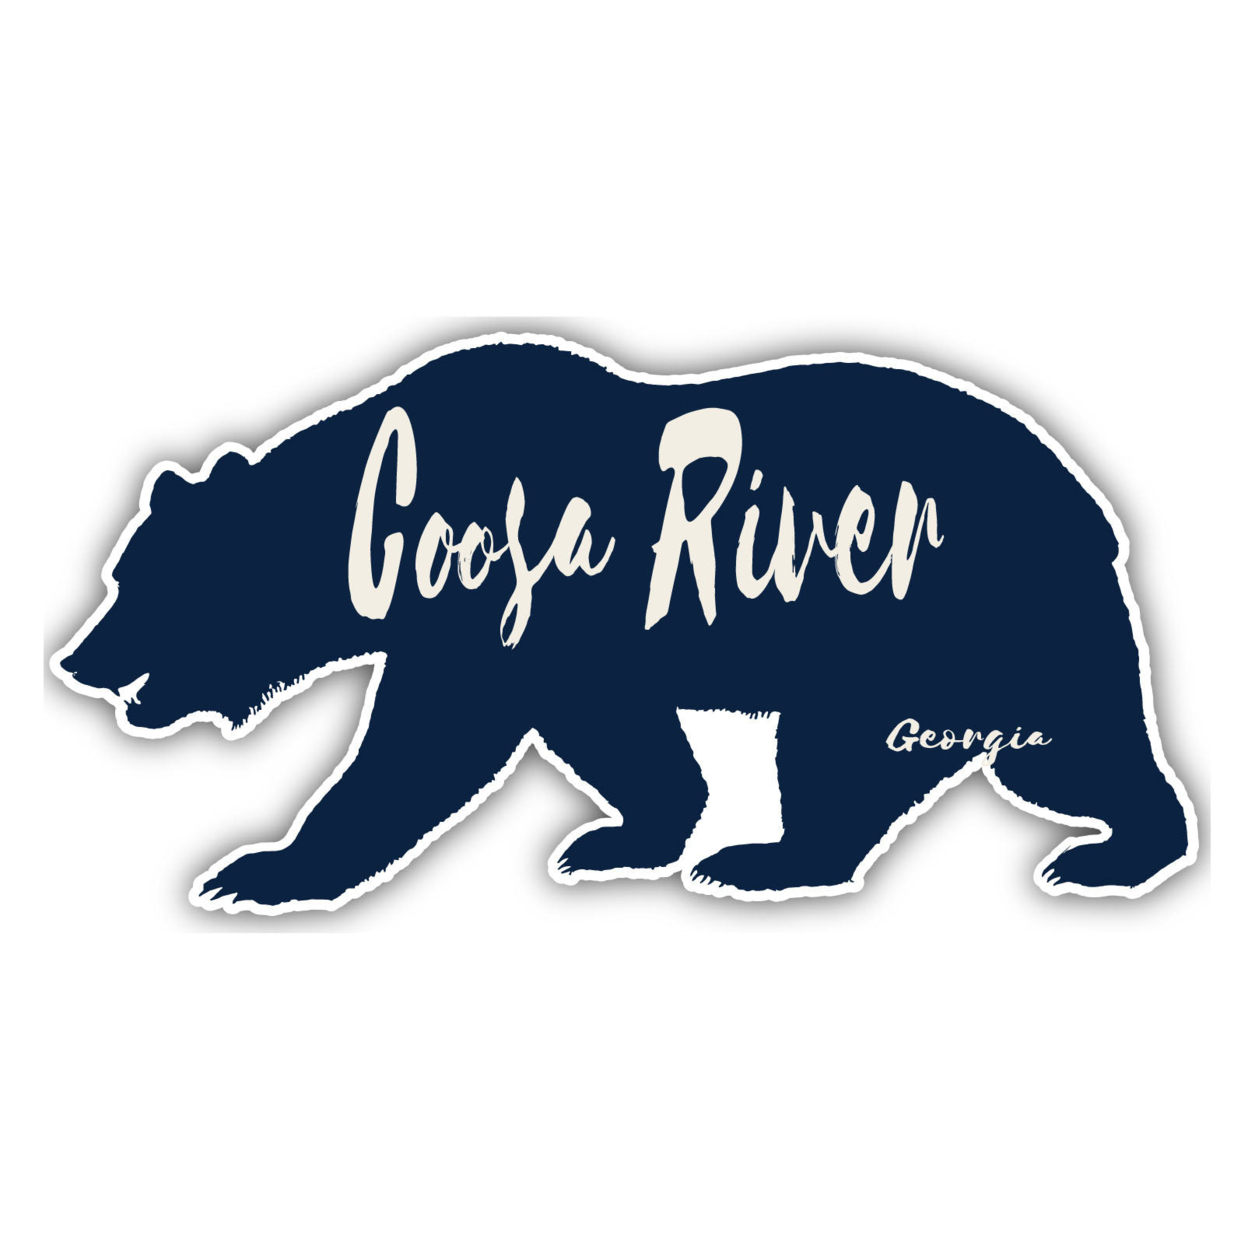 Coosa River Georgia Souvenir Decorative Stickers (Choose Theme And Size) - 4-Pack, 8-Inch, Bear